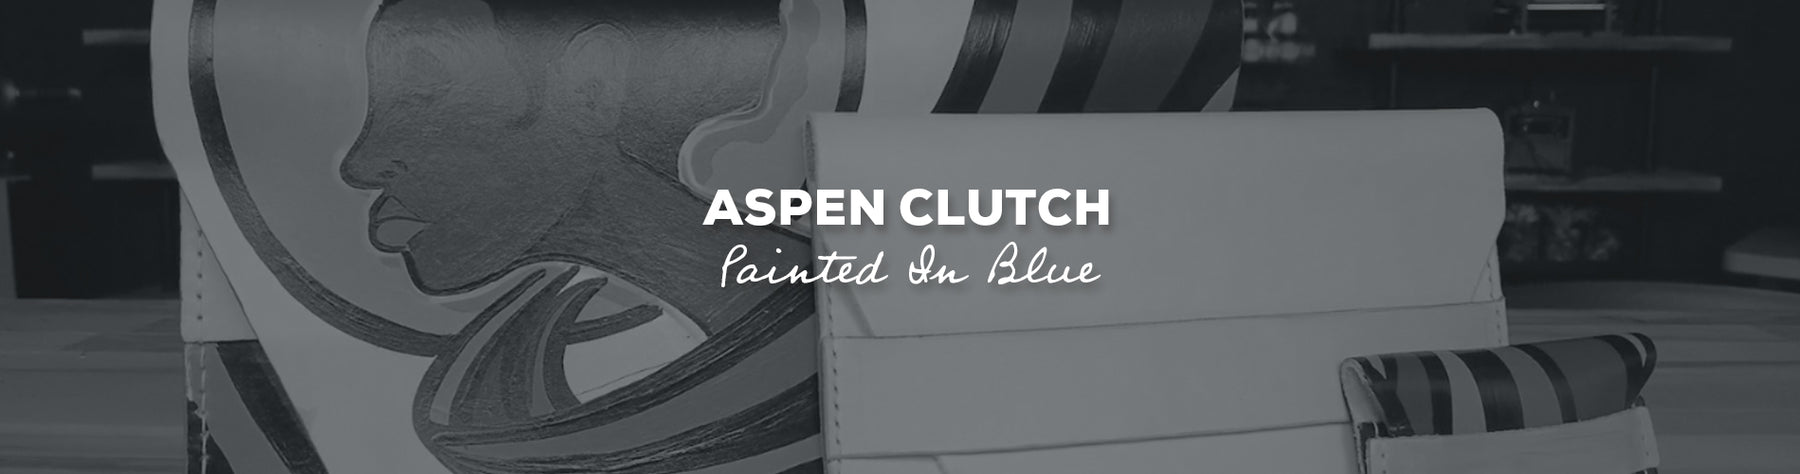 Gift Idea: Aspen Clutch Kit with Painted In Blue